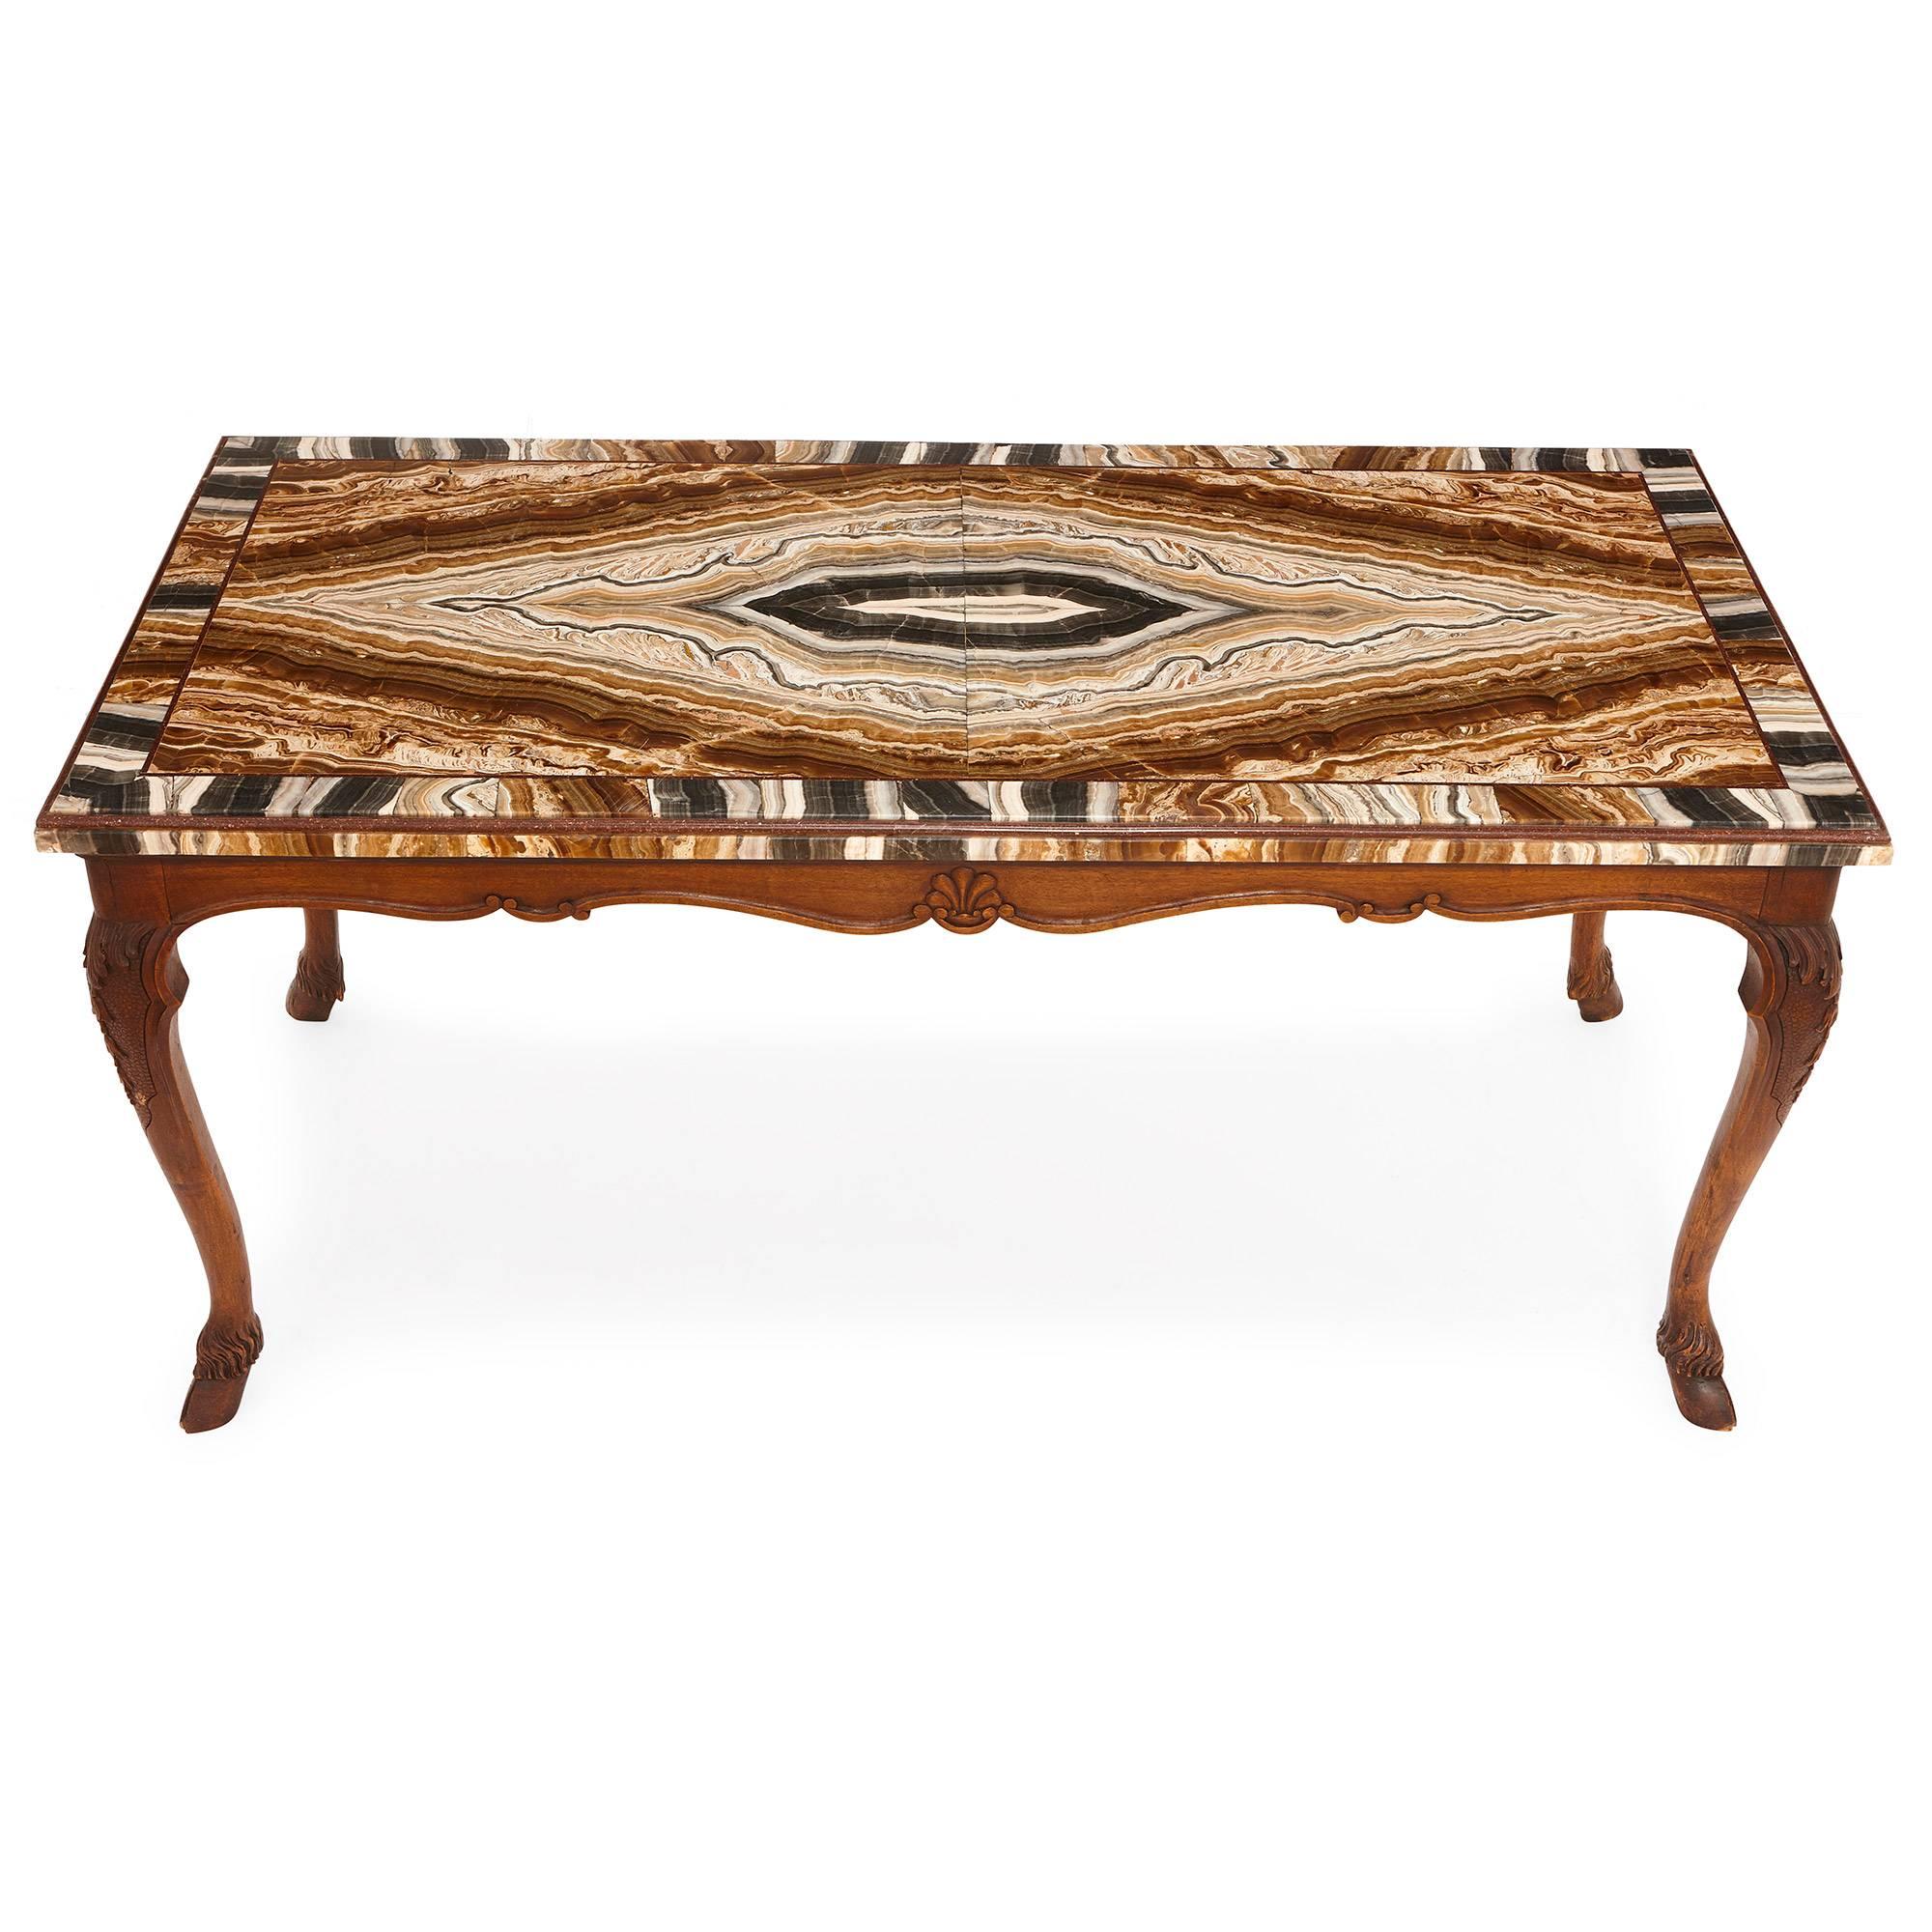 This coffee table was created in Italy in the 18th century. It features a rectangular top, which is crafted from onyx and edged with porphyry. This table top is composed of bands of colours, including black, grey, white, brown and orange. This top